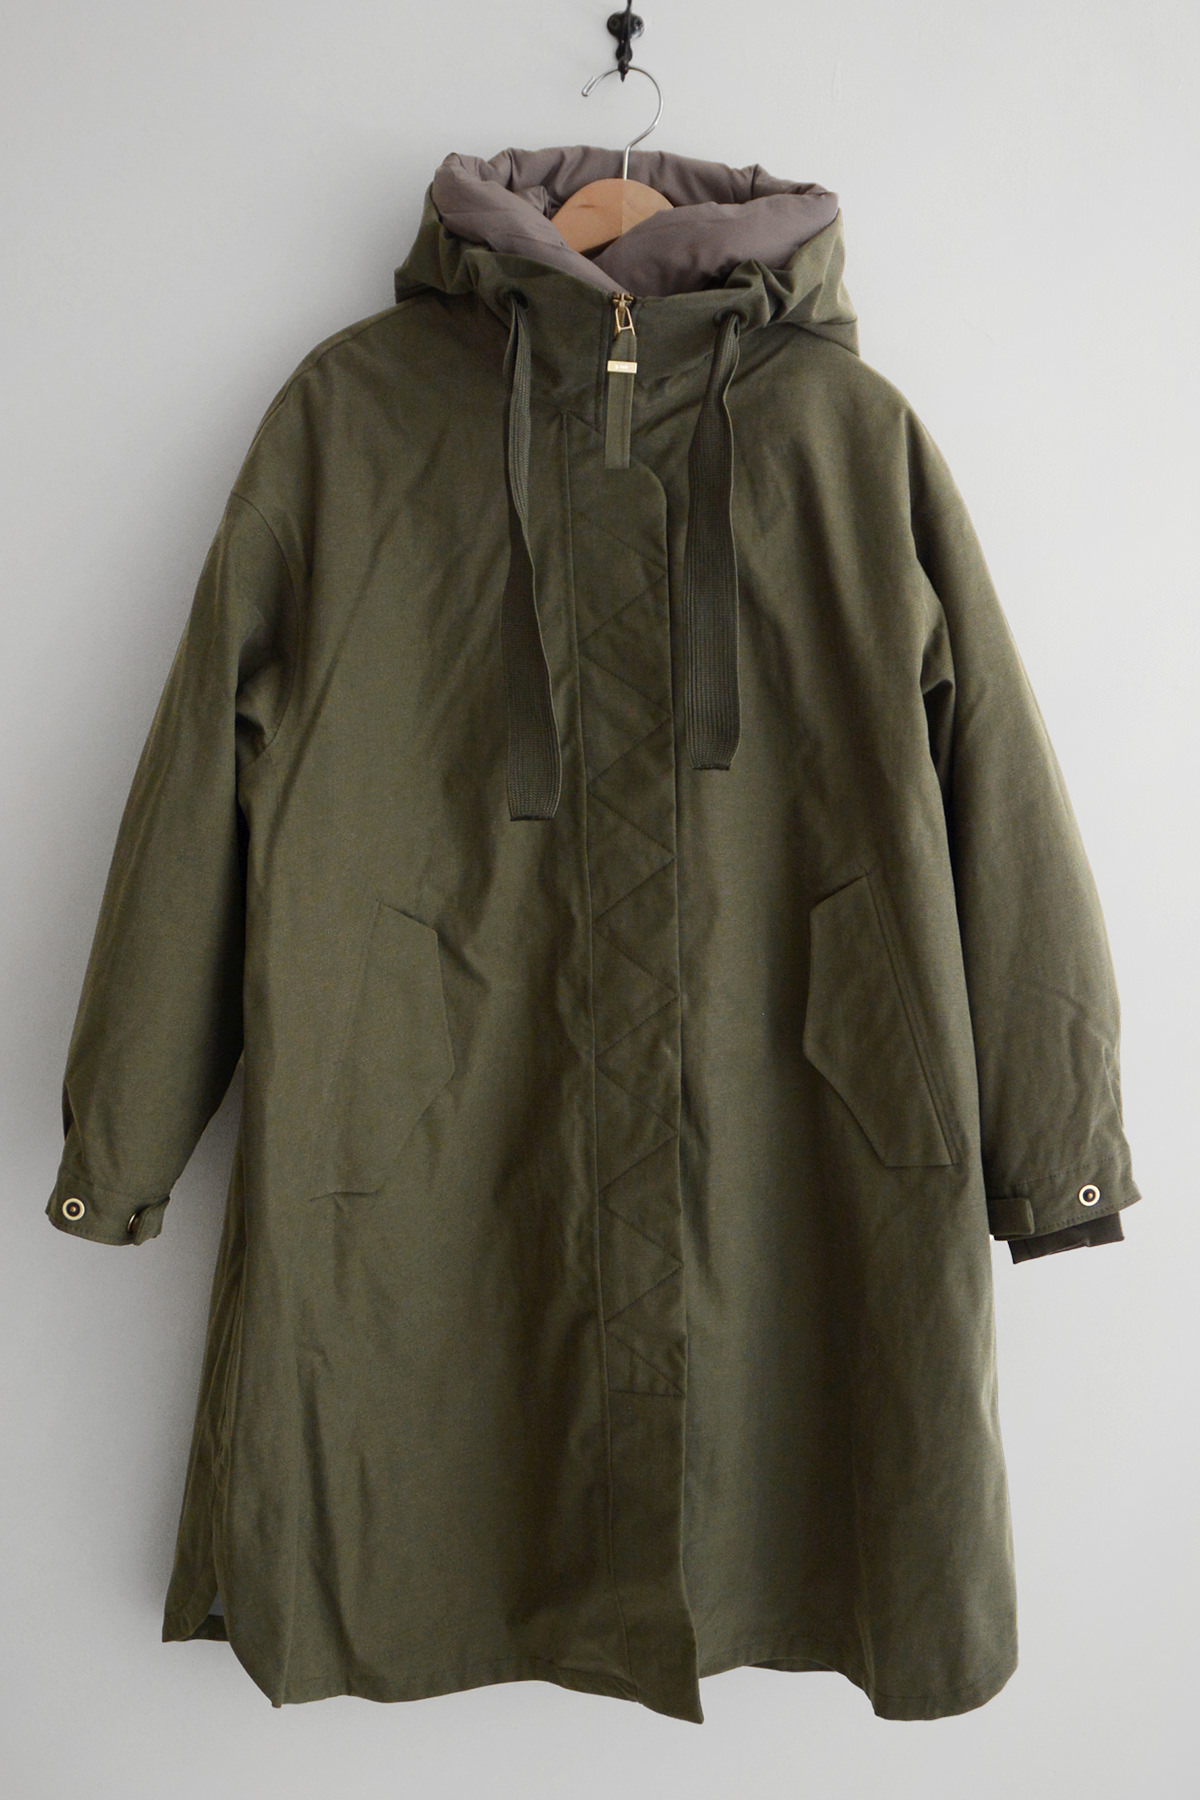 G-lab Akira Soft Canvas Coat in Leaf Top Picture